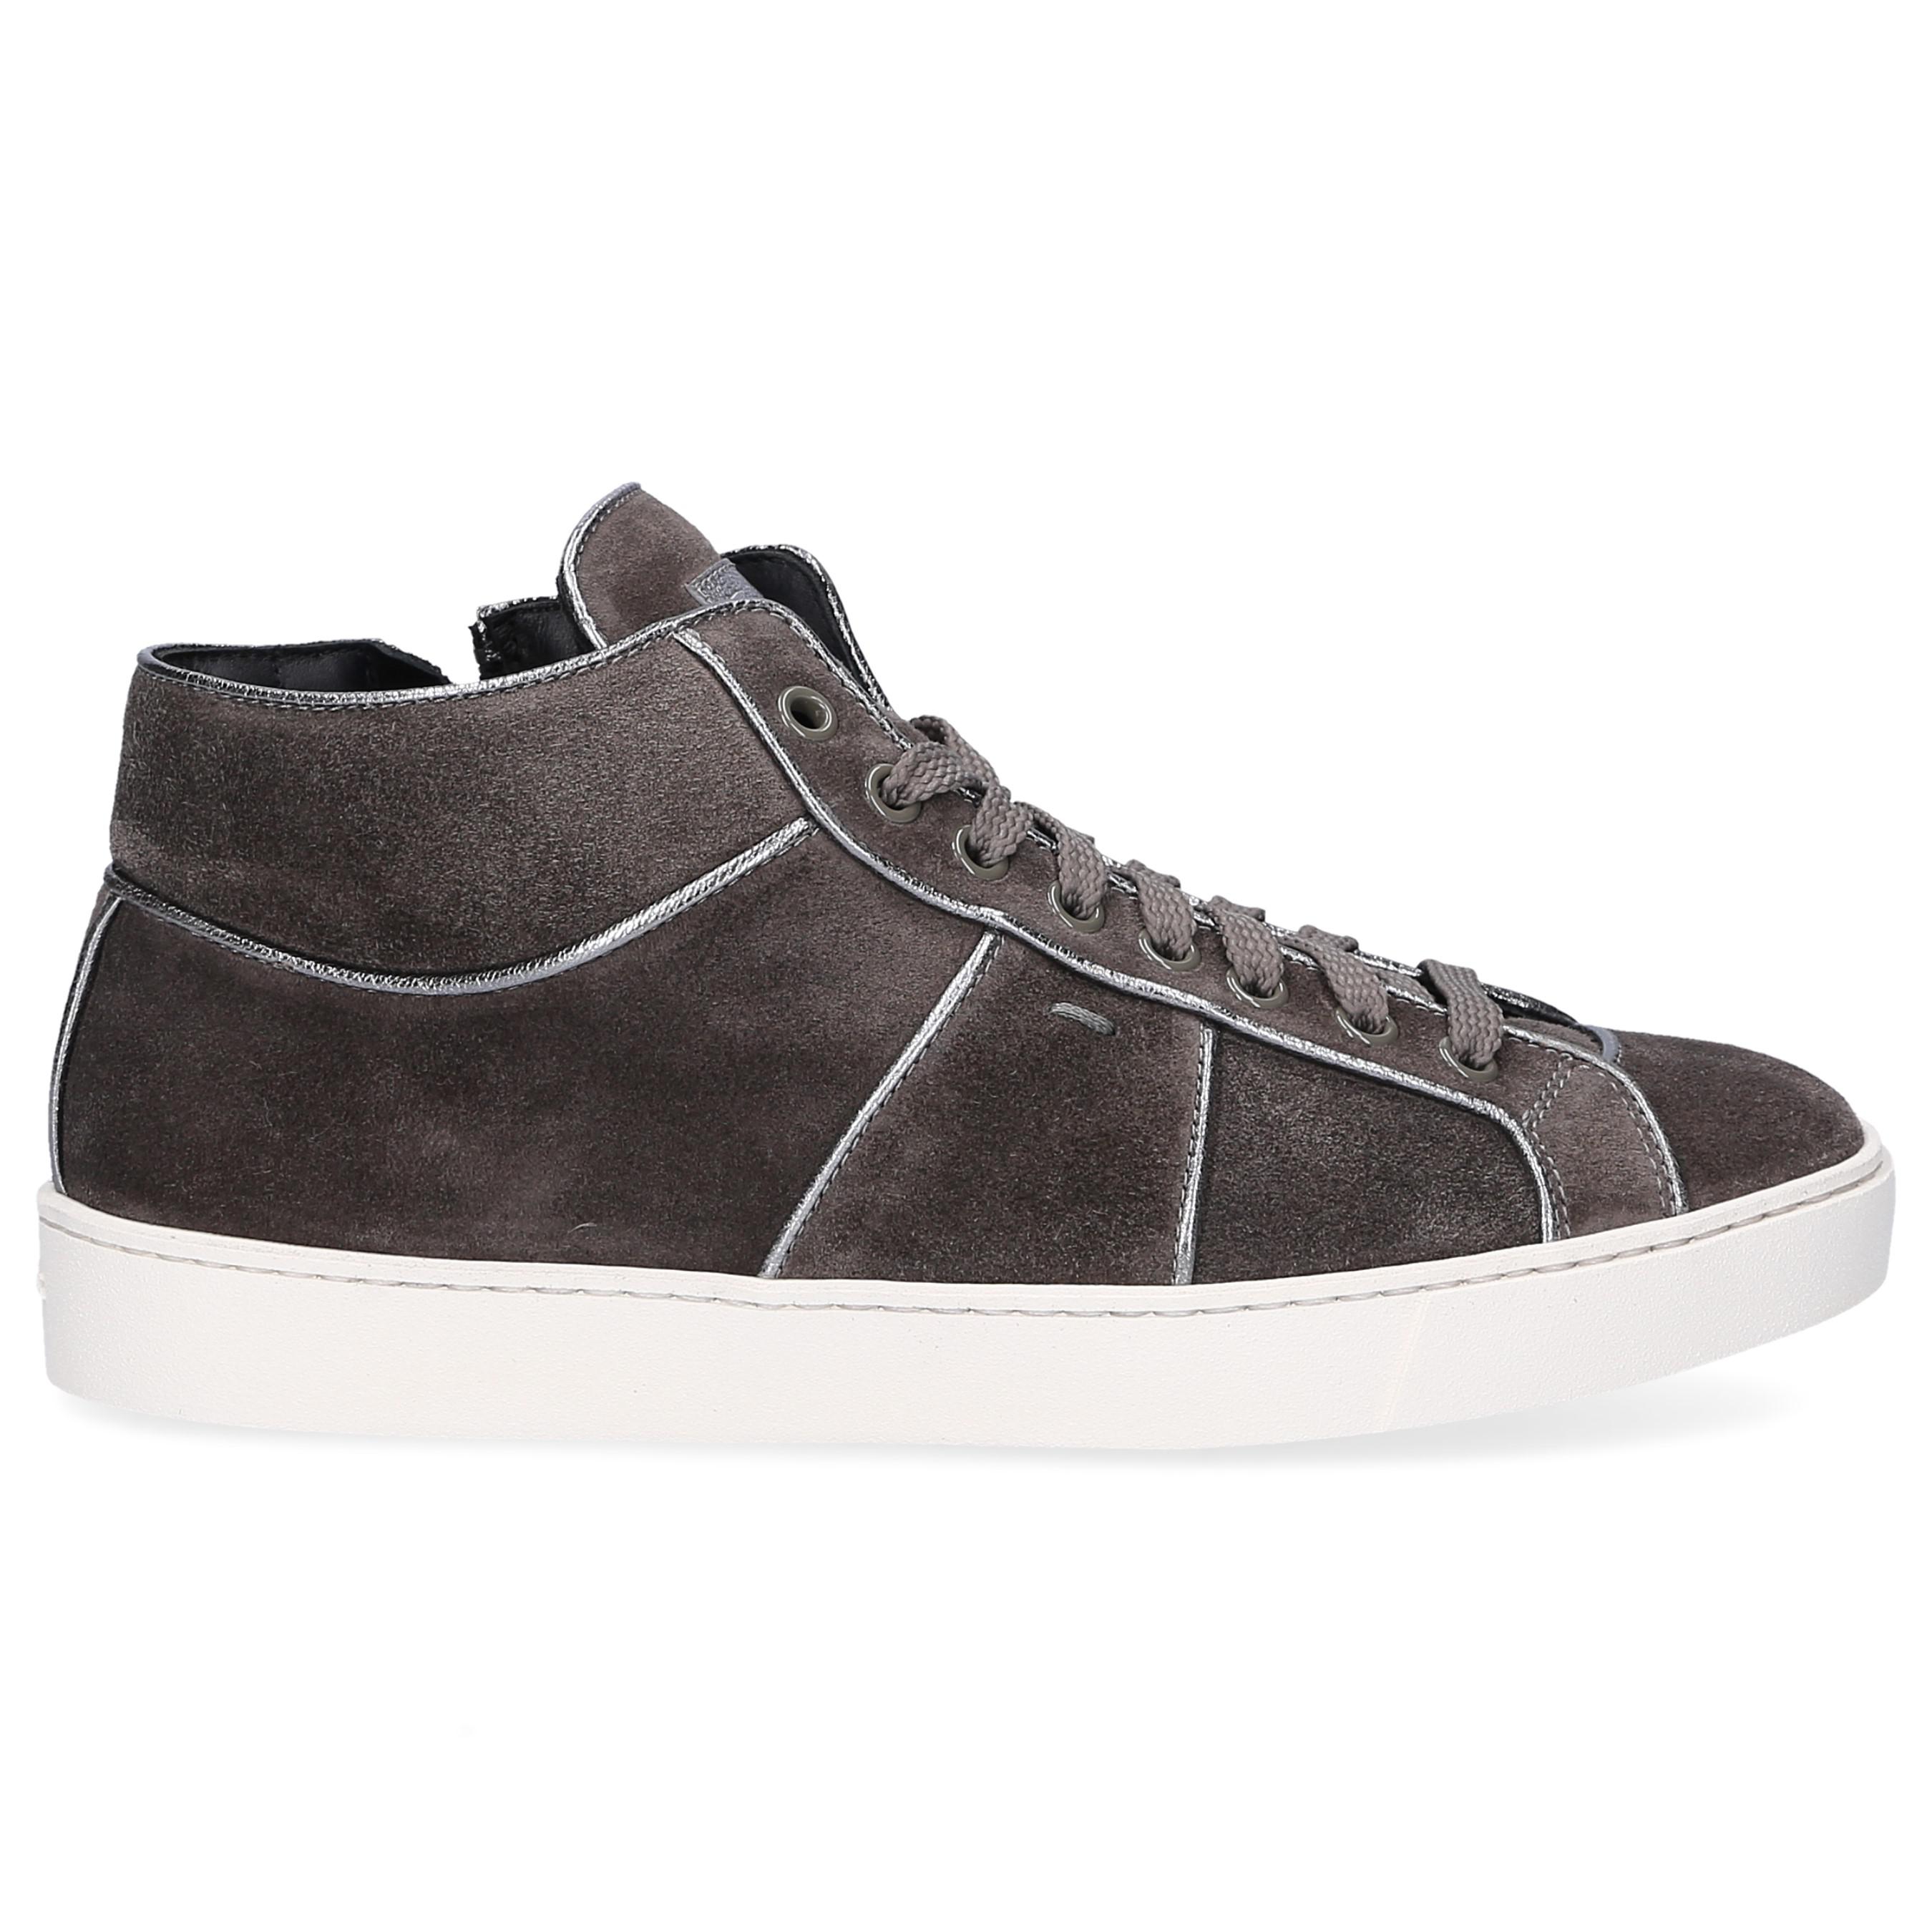 Lyst - Santoni High-top Sneakers 60429 Suede Taupe in Gray